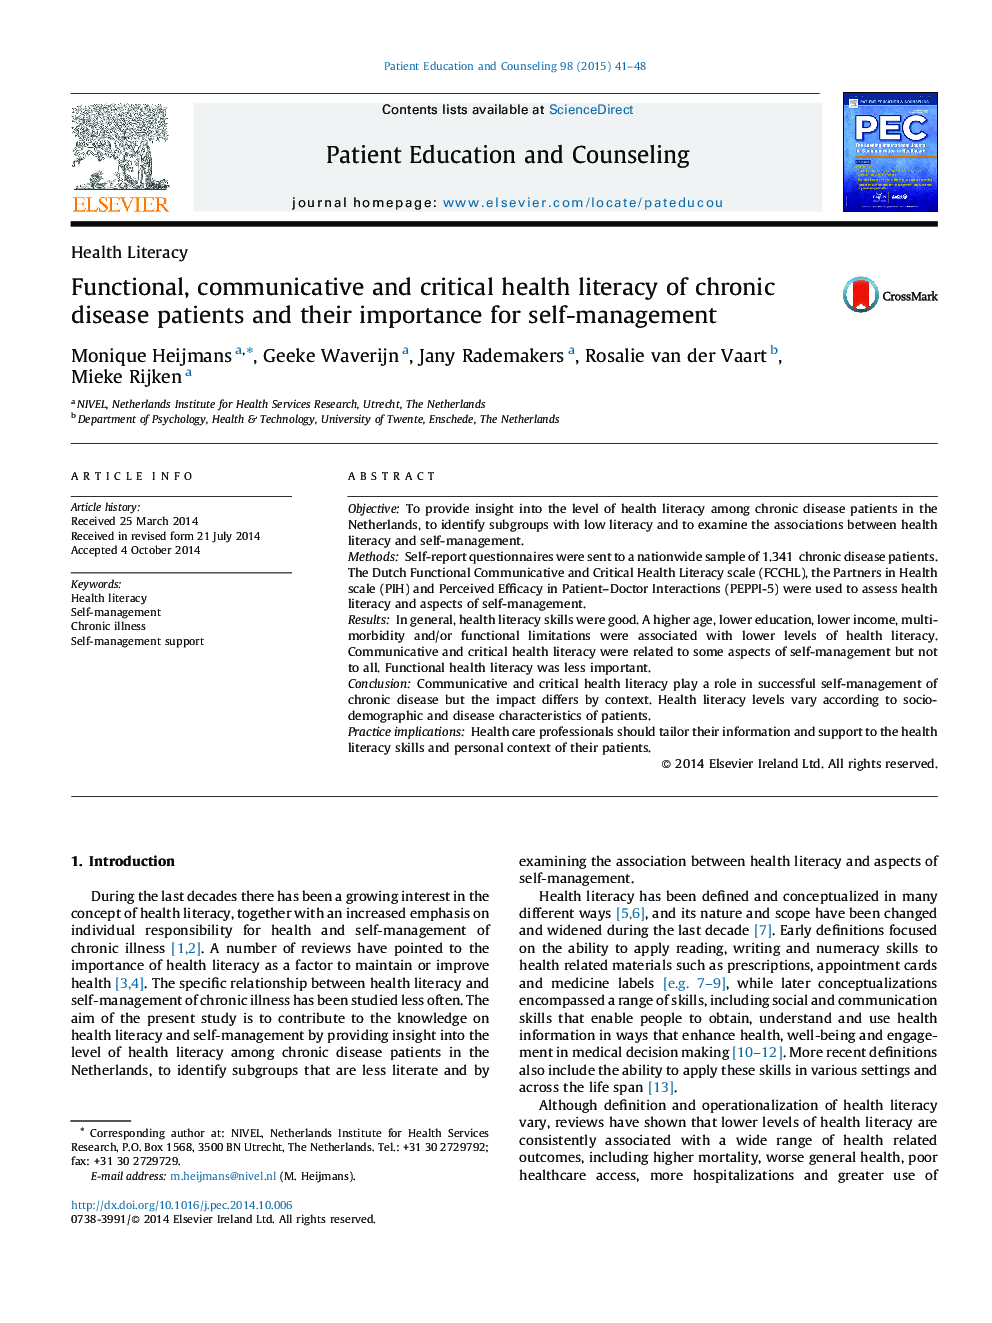 Functional, communicative and critical health literacy of chronic disease patients and their importance for self-management